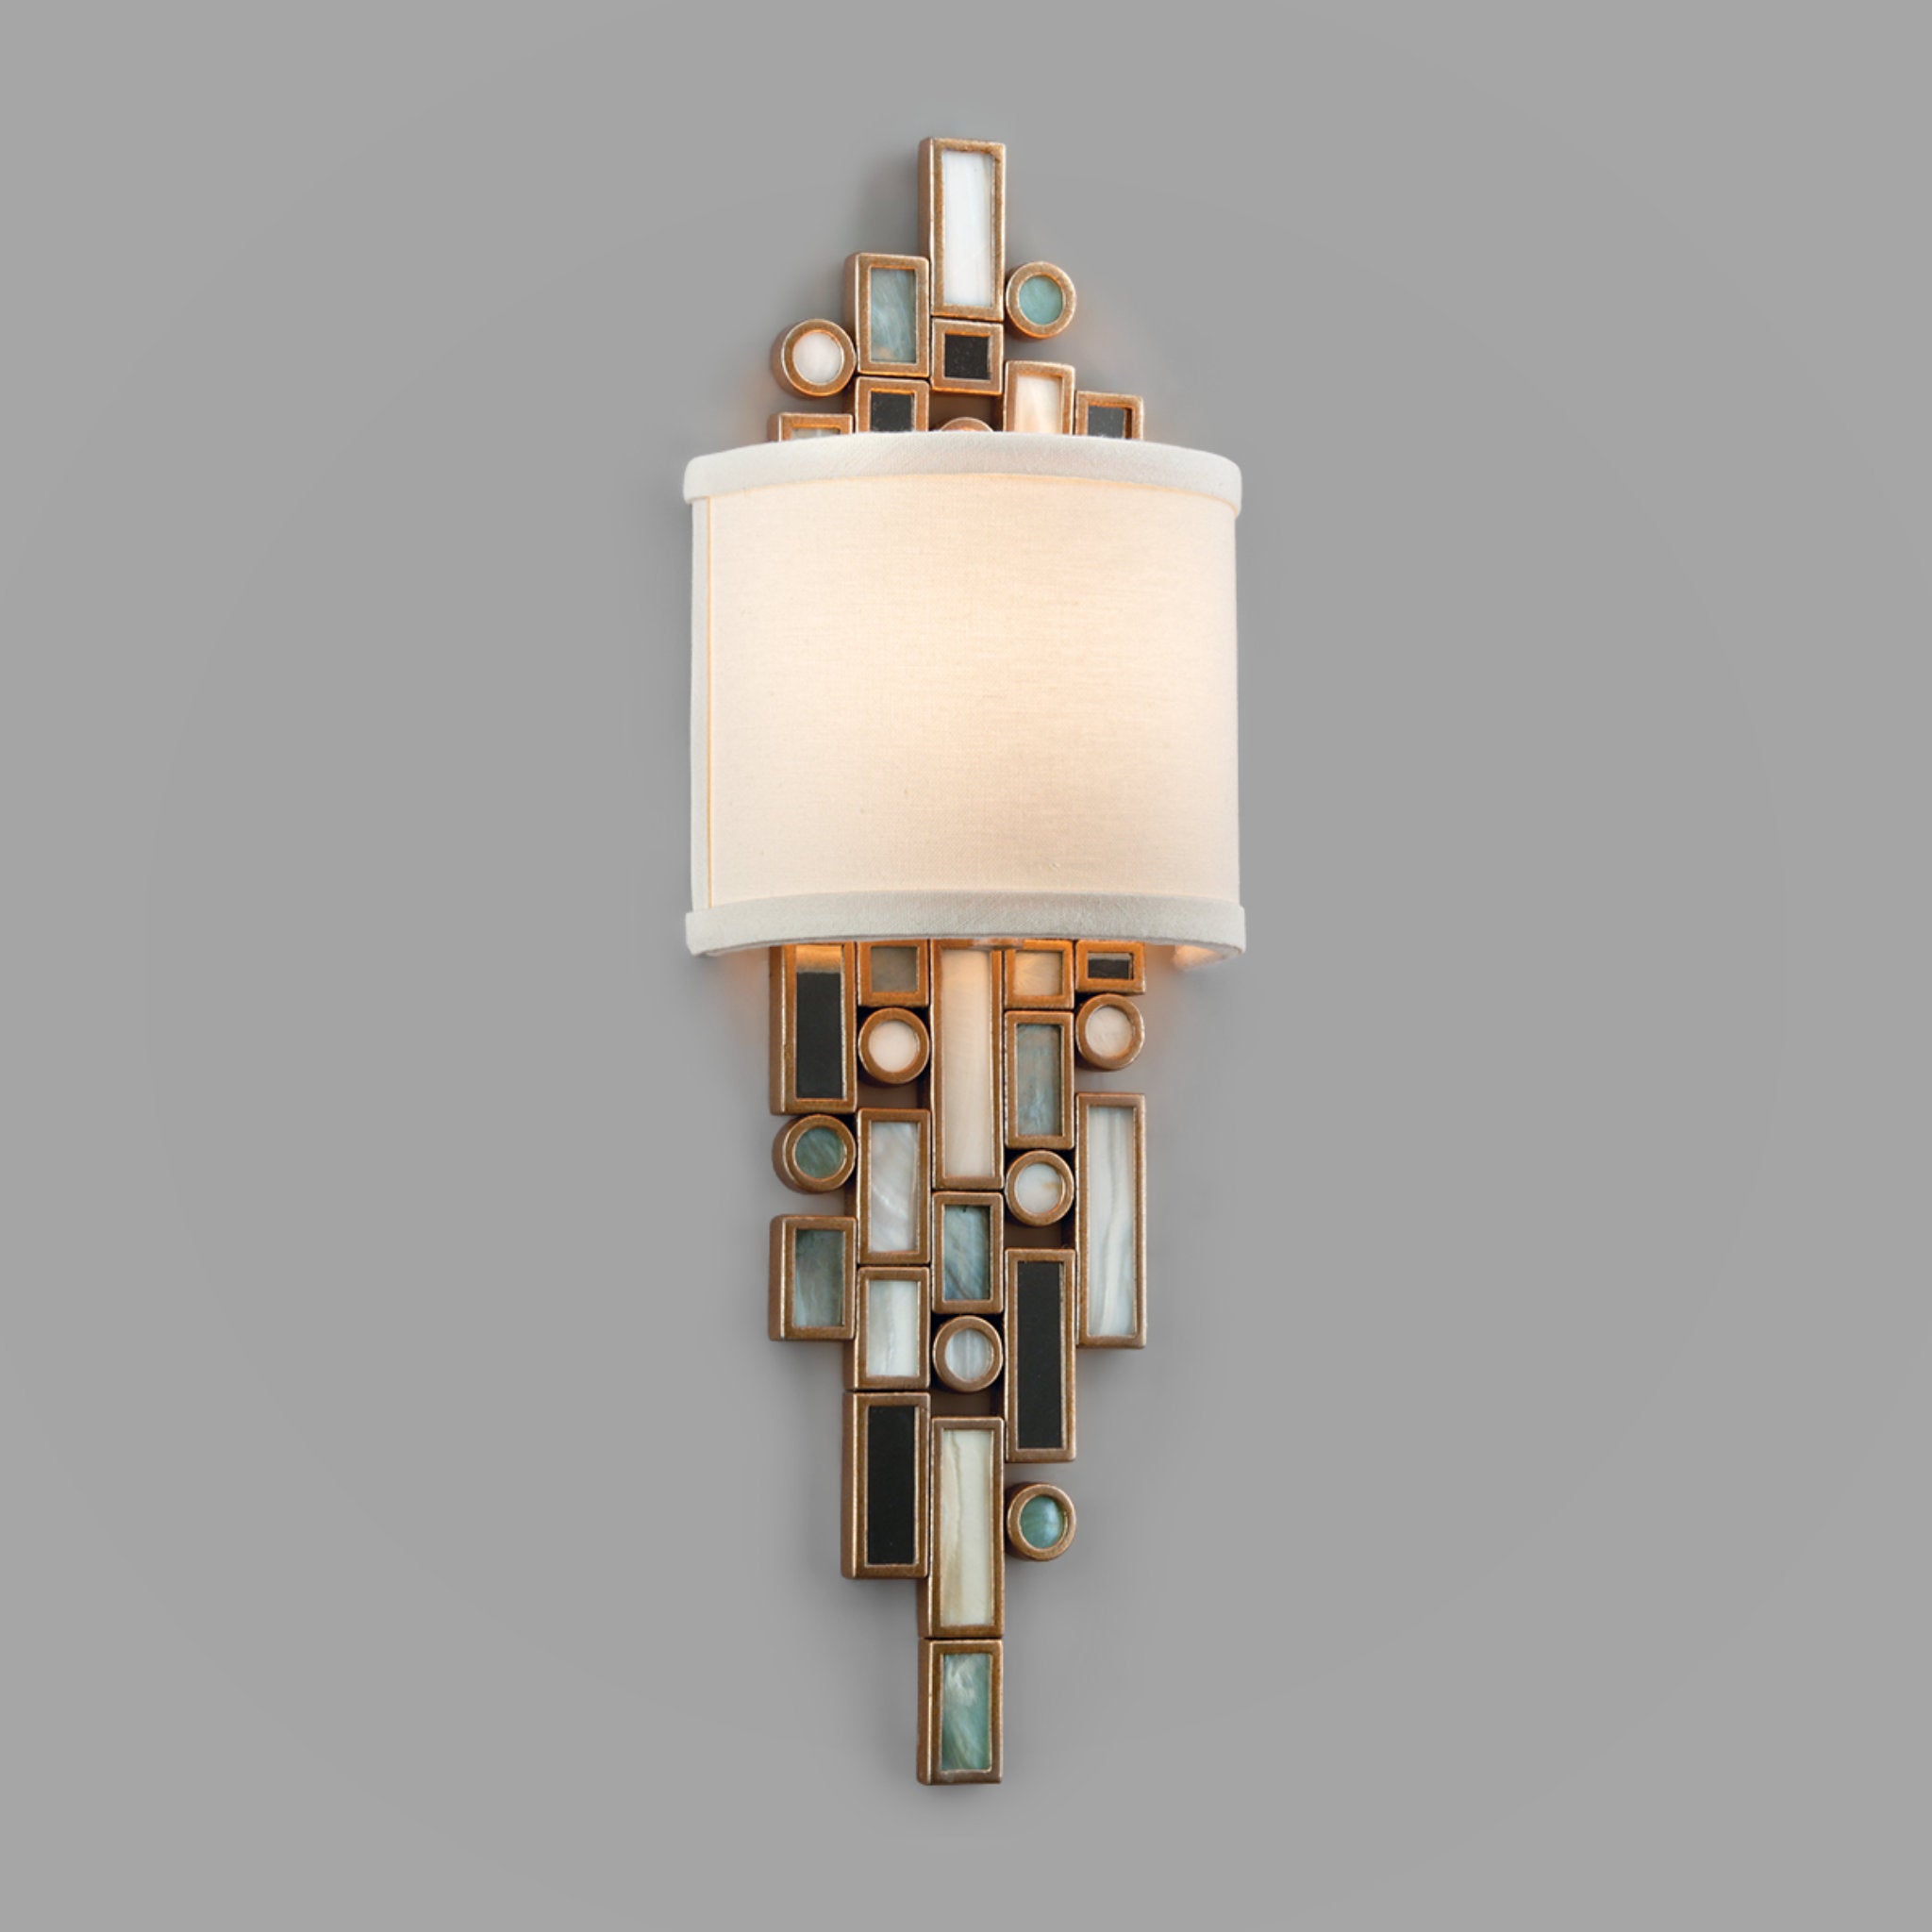 Dolcetti 1 Light Wall Sconce in Dolcetti Silver